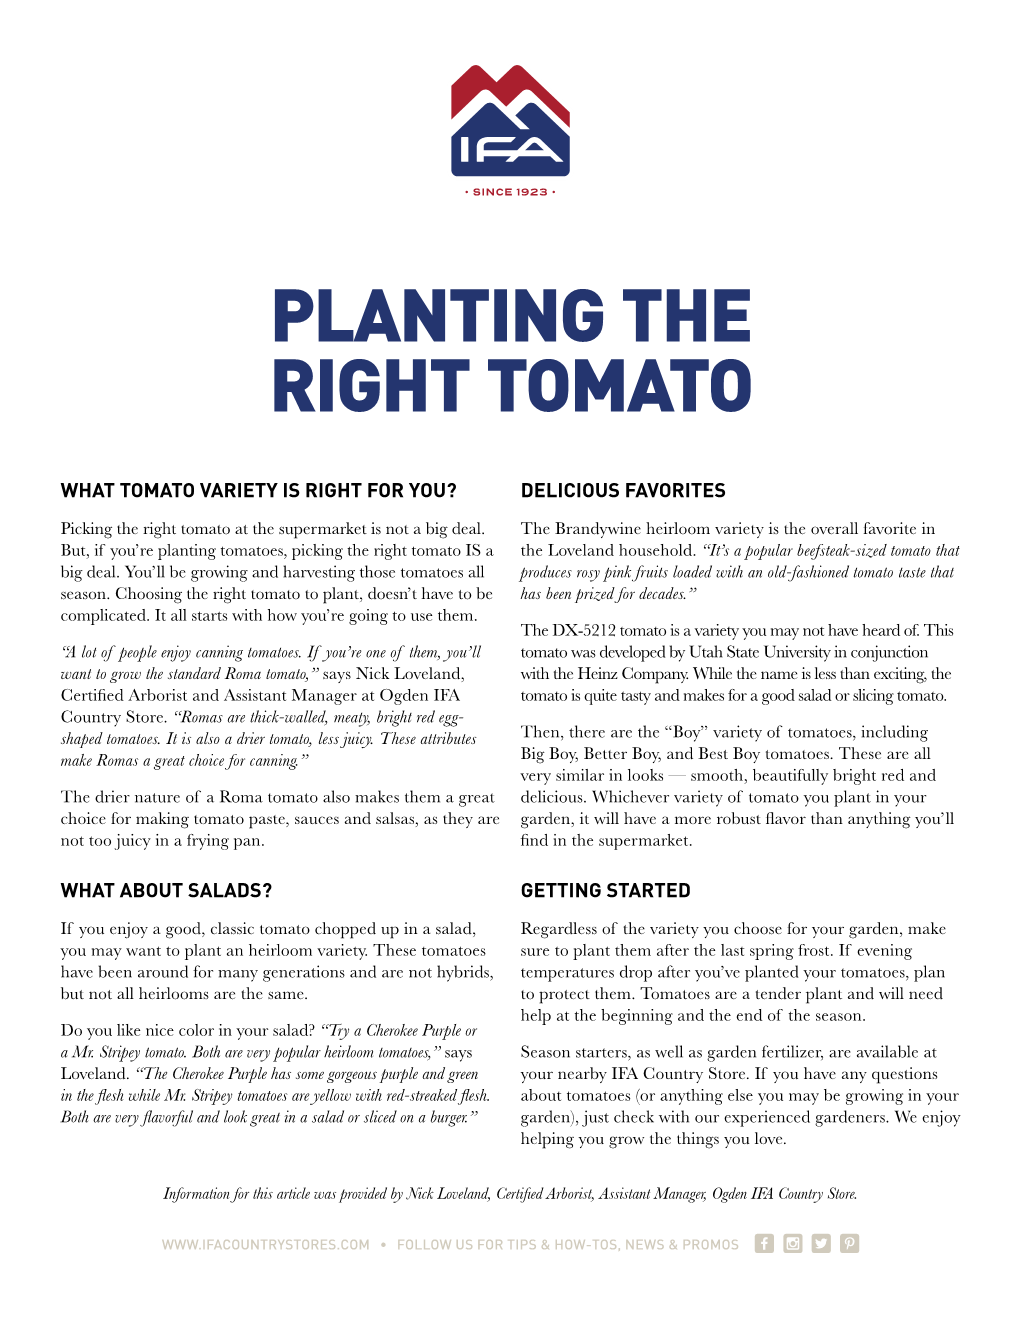 Planting the Right Tomato